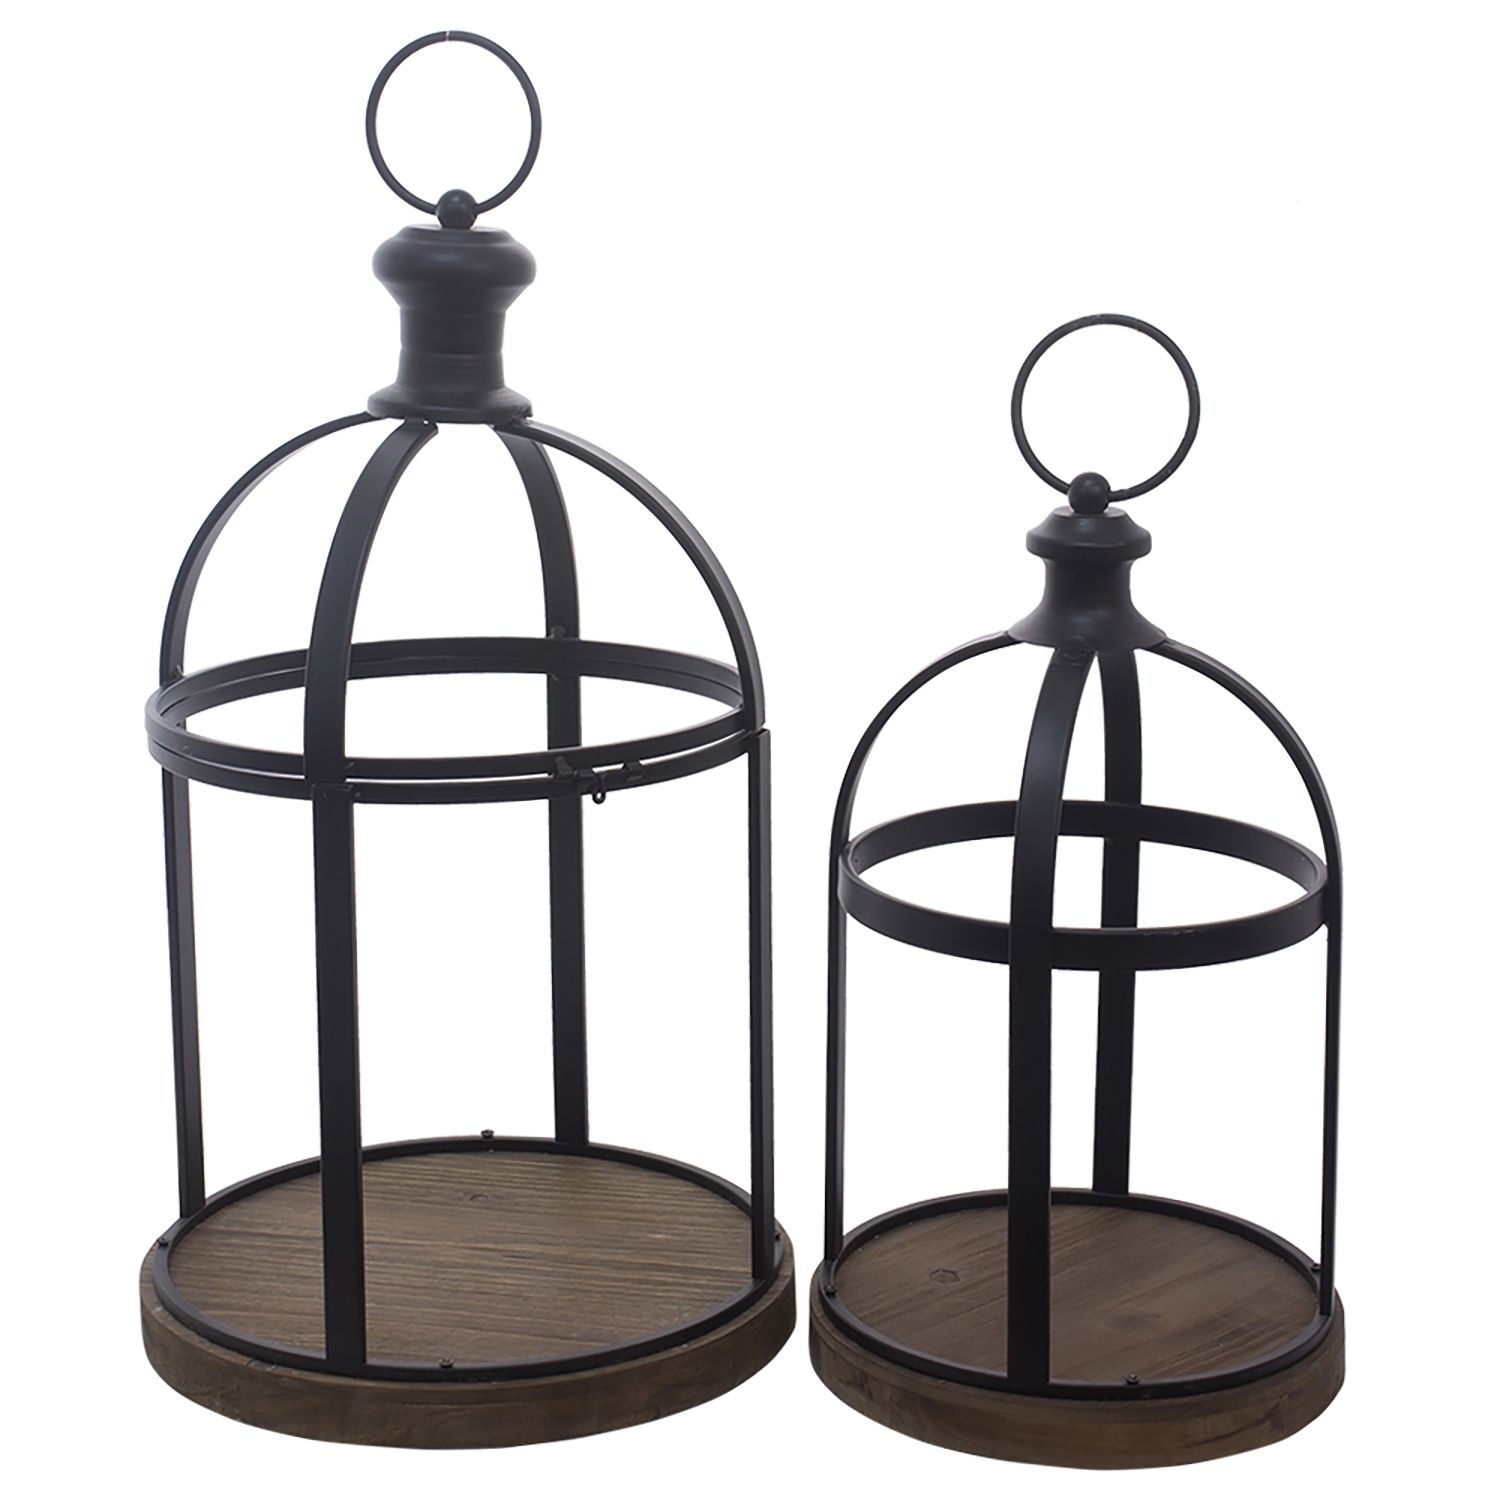 https://ak1.ostkcdn.com/images/products/is/images/direct/b504755213a16985b1cccc1ef0293fe7f31f3847/Set-of-2-Brown-and-Black-Round-Base-Lanterns.jpg